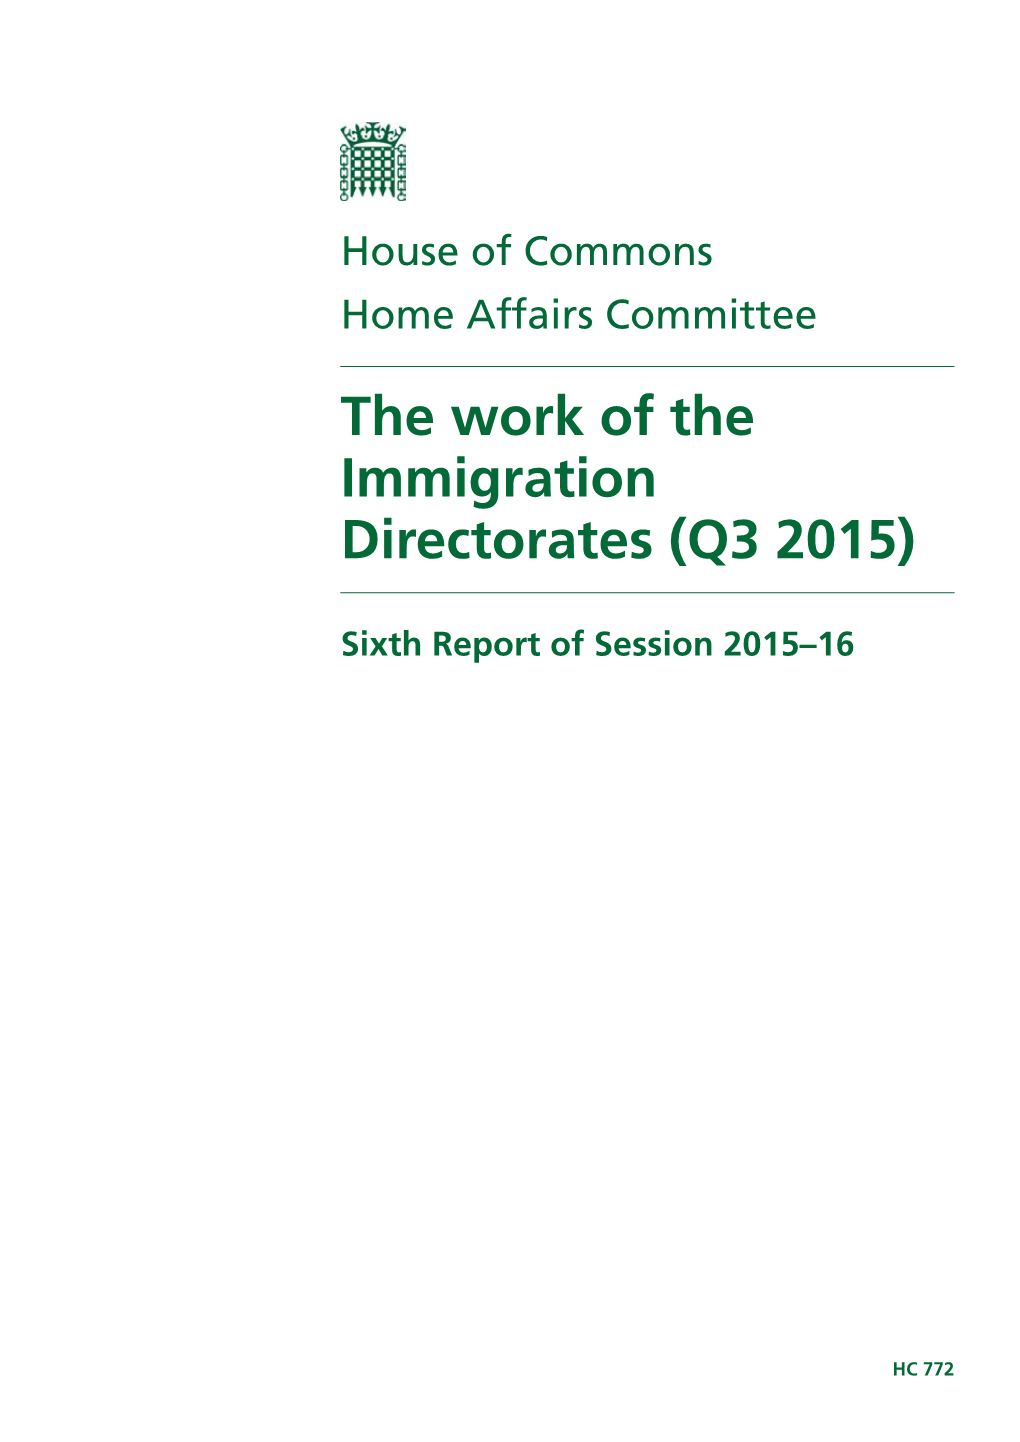 The Work of the Immigration Directorates (Q3 2015)